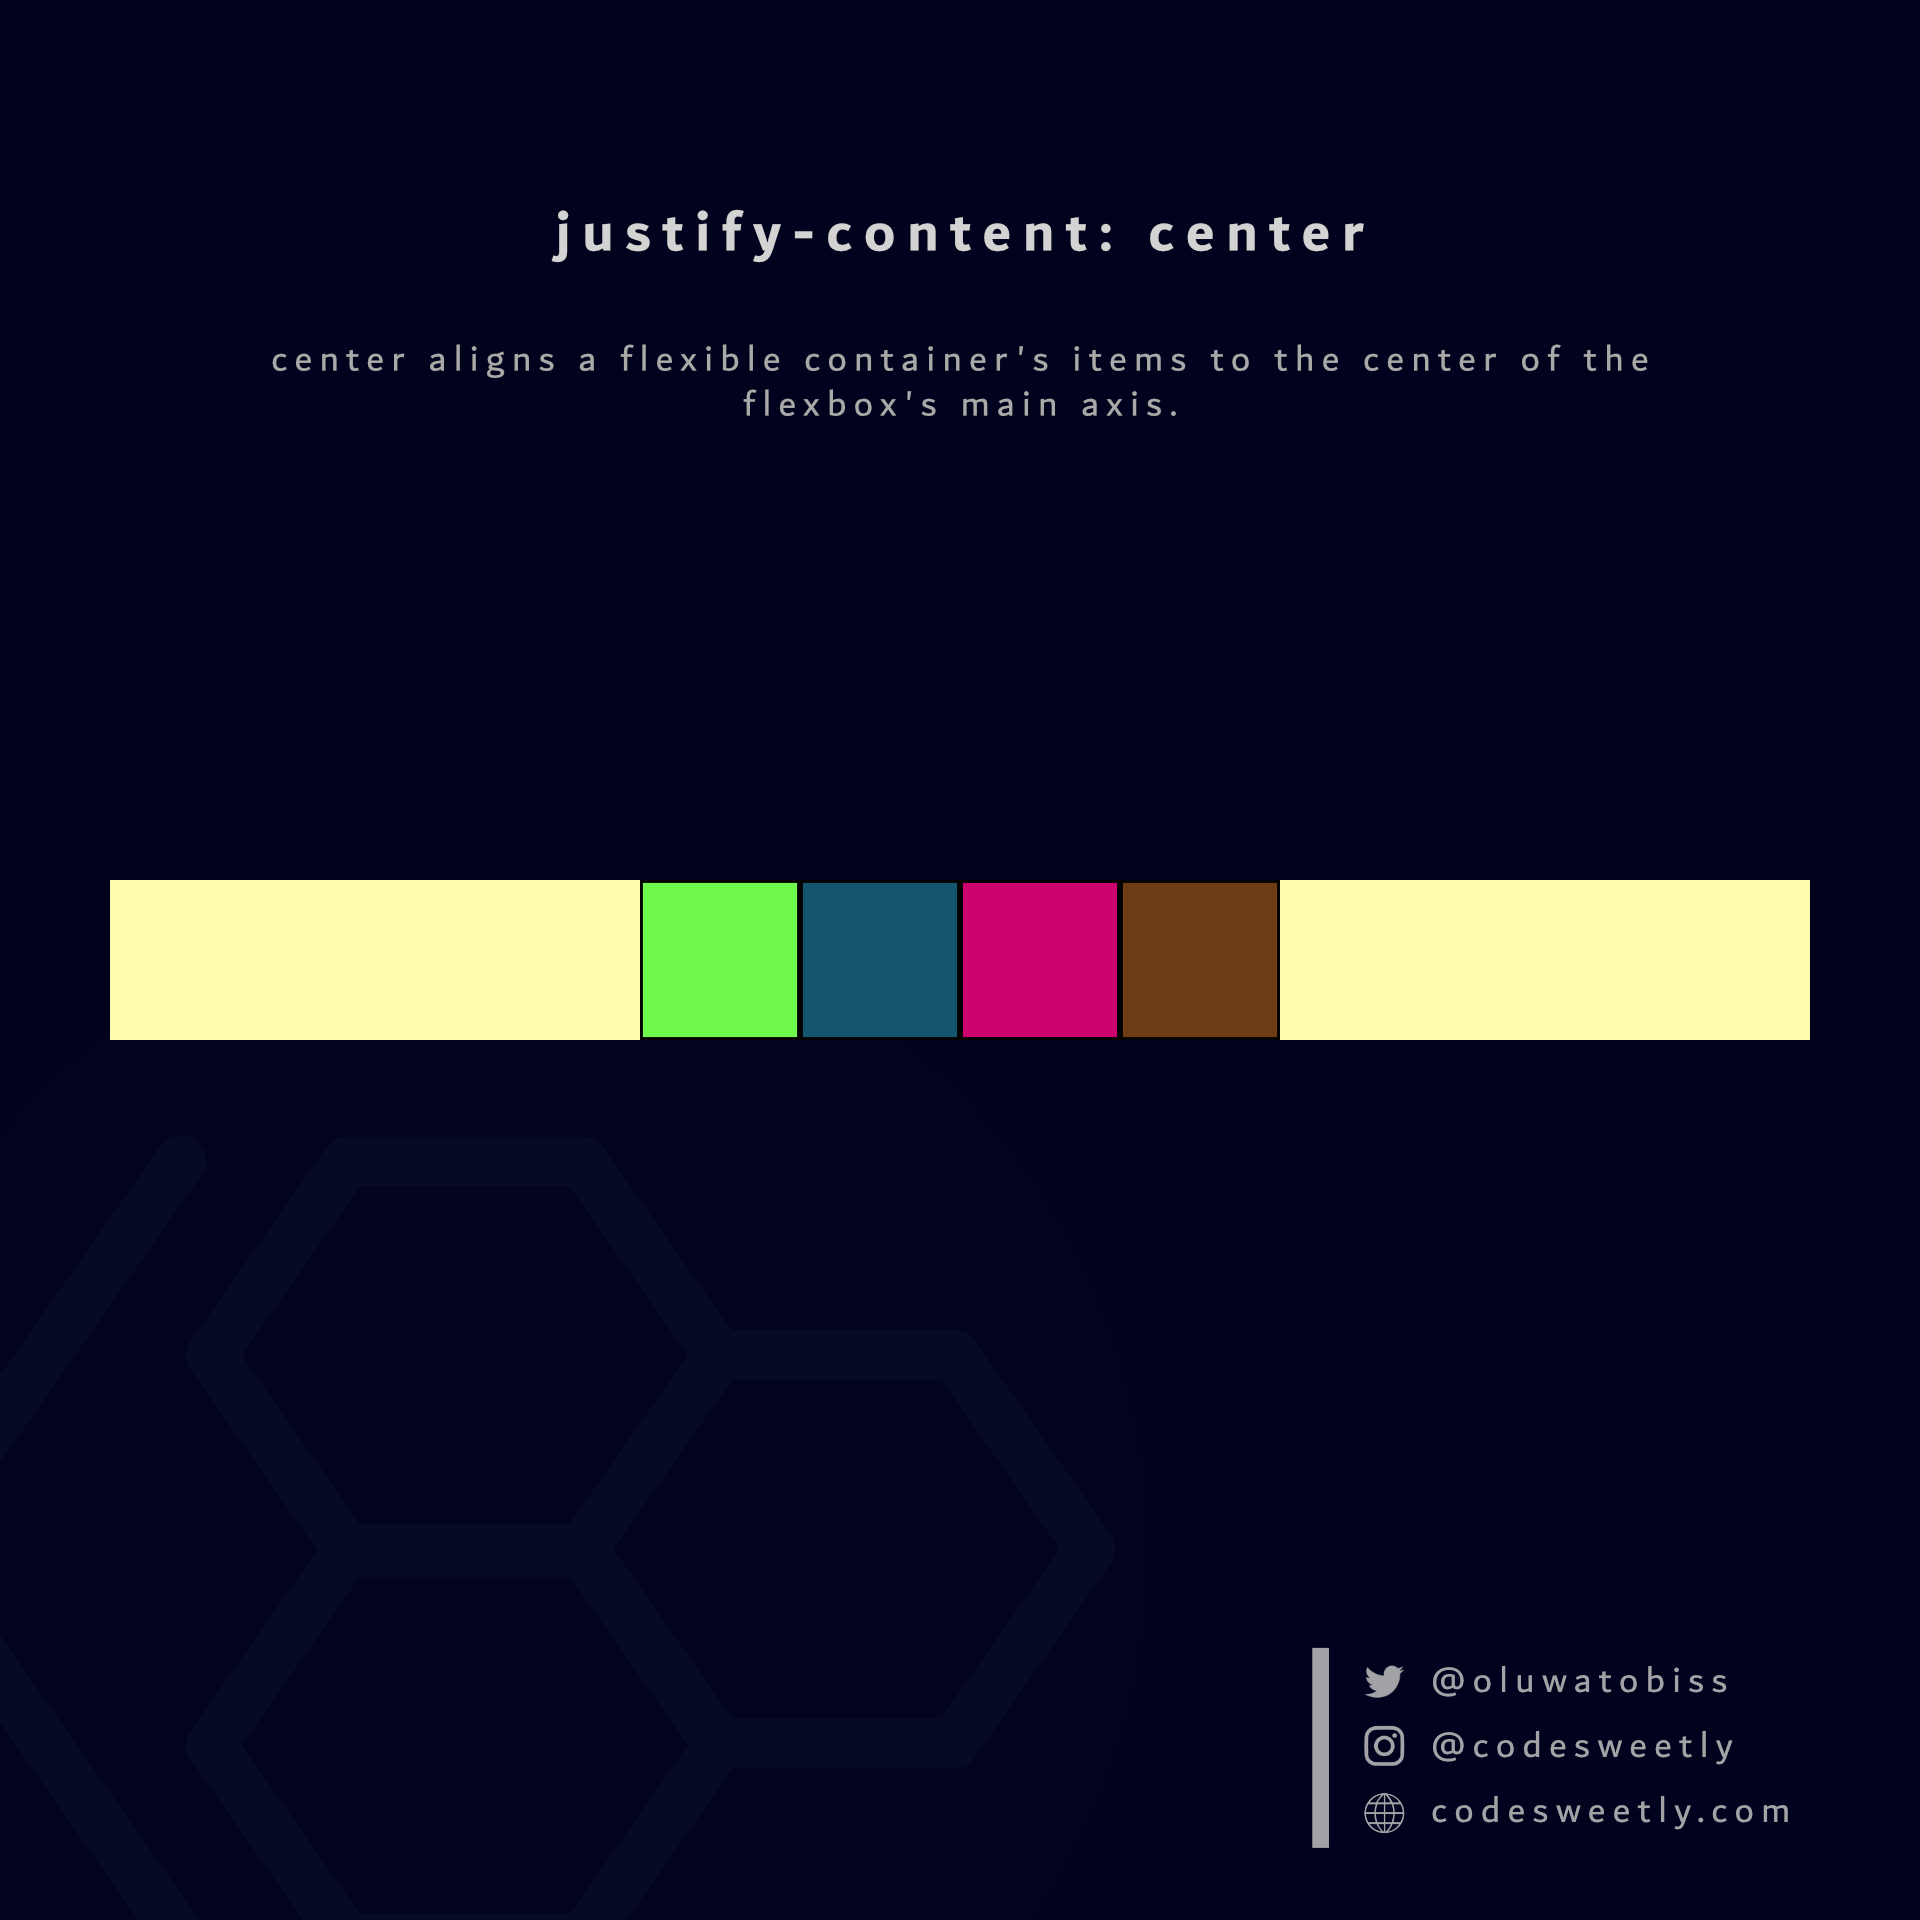 justify-content's center value aligns flexible items to the center of the flexbox